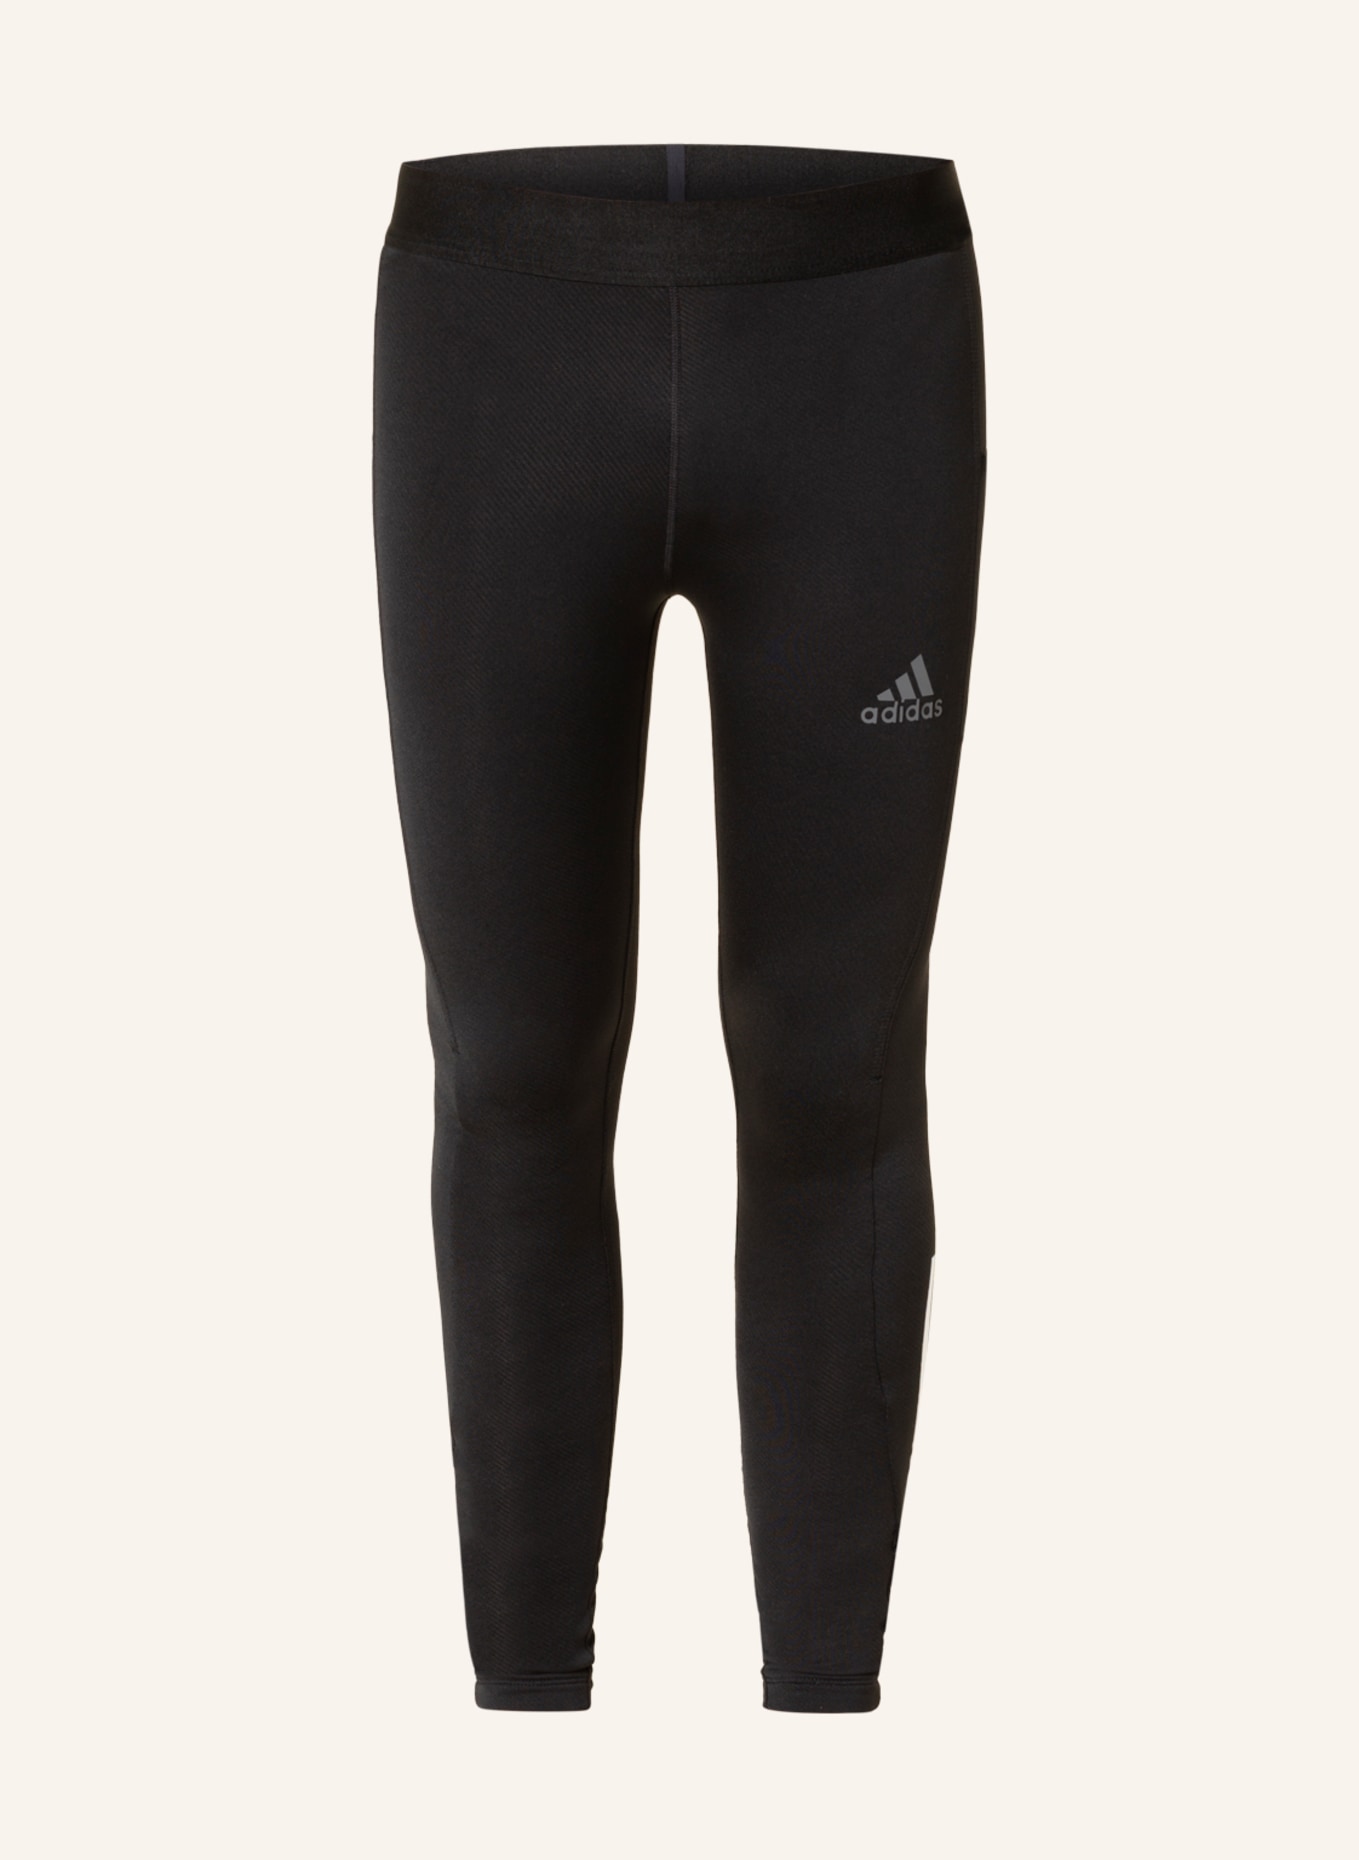 adidas Tights COLD.RDY TECHFIT in black